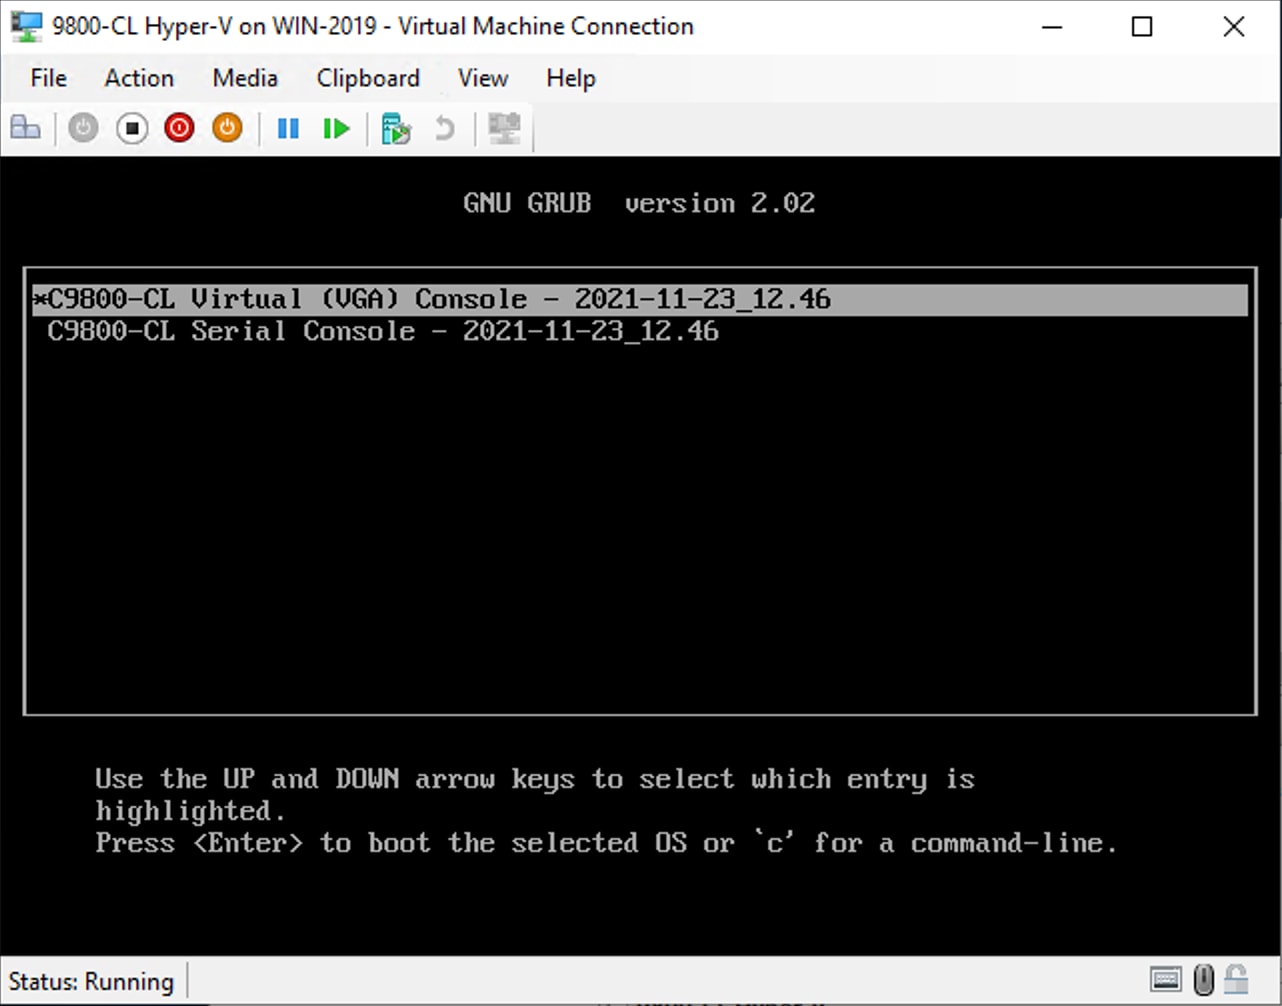 The installation progress can be monitored through the Hyper-V console